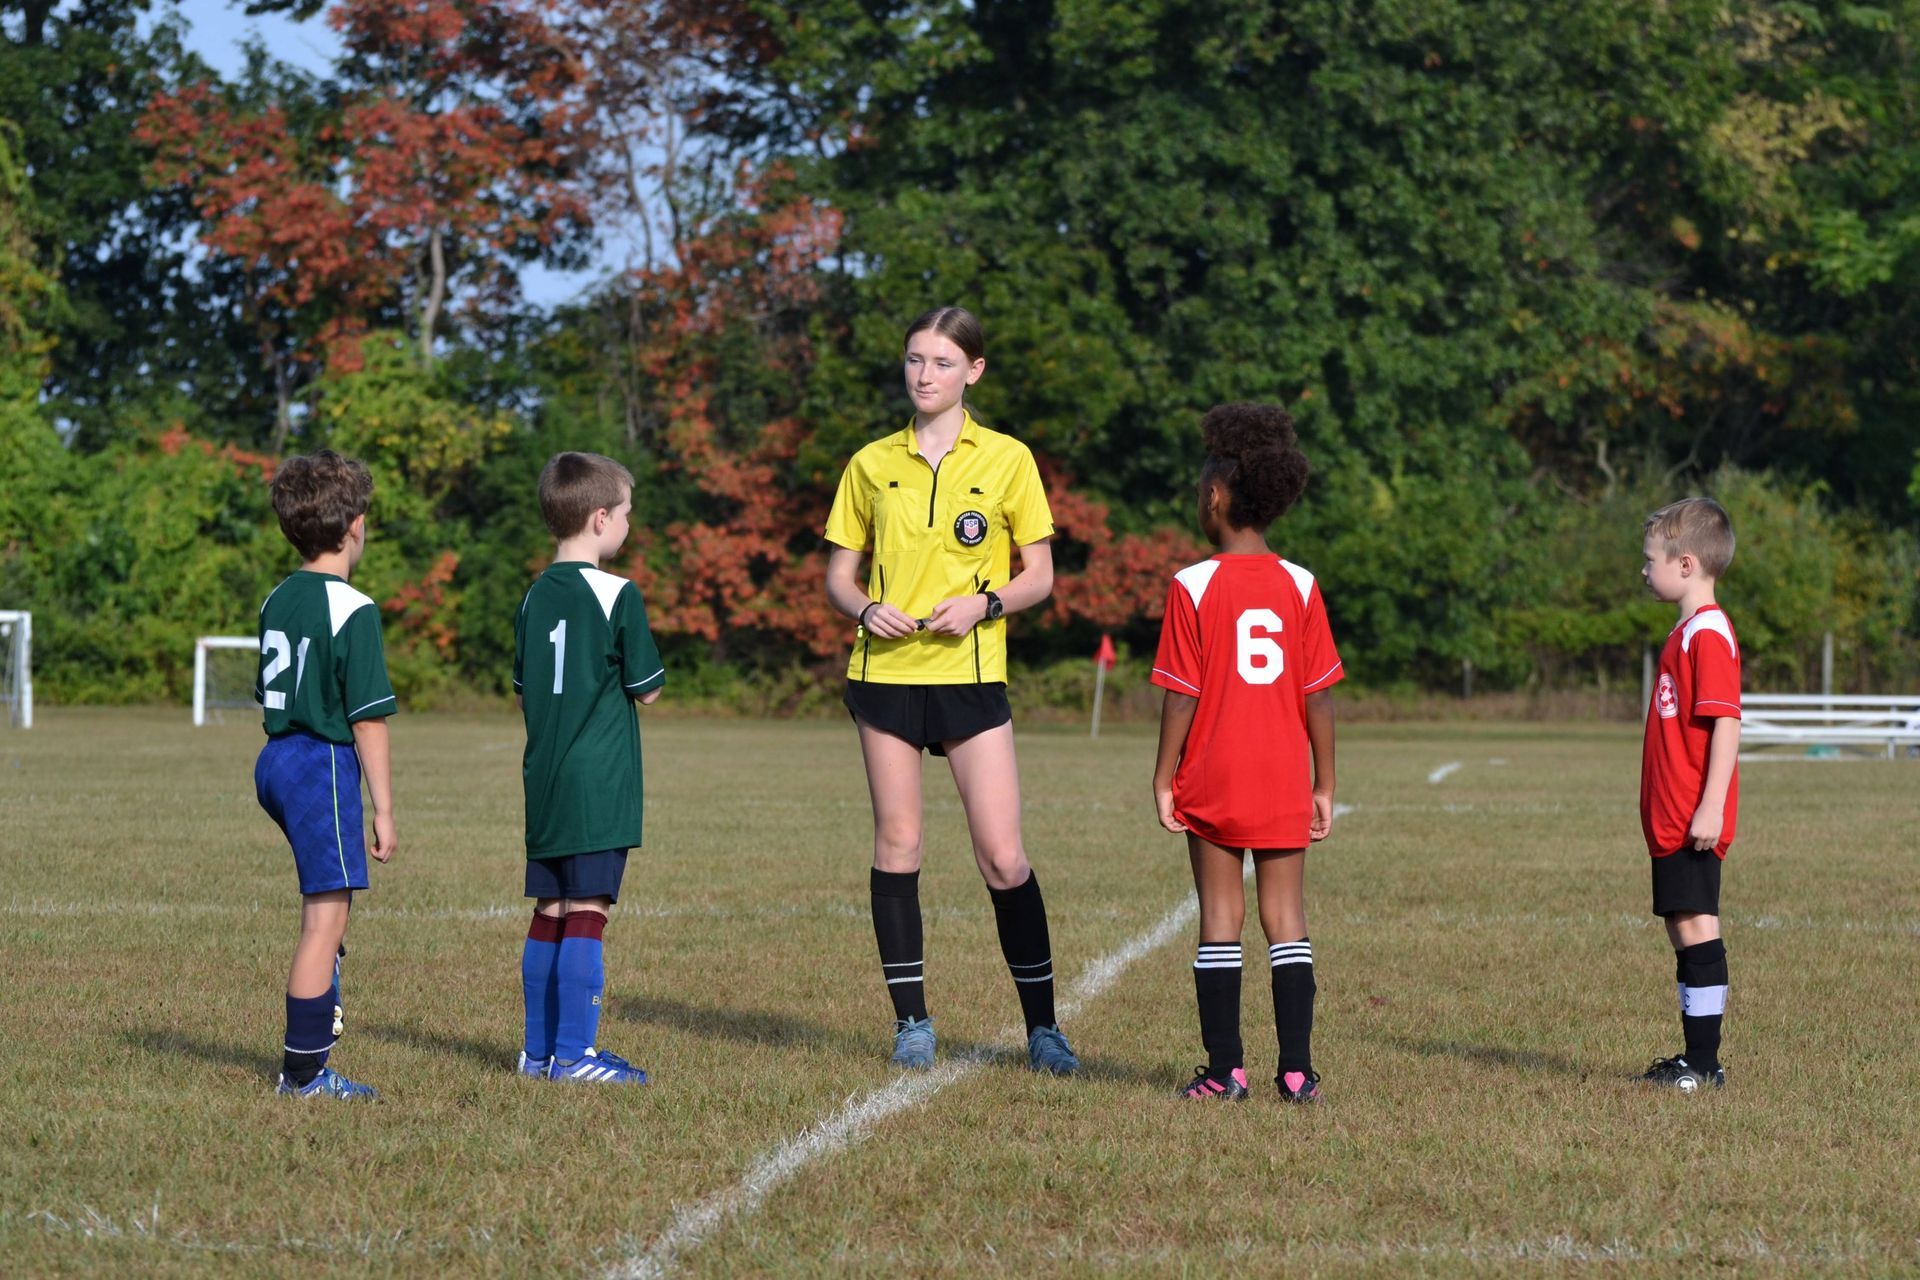 Clarke County Soccer League referee reffing a game.